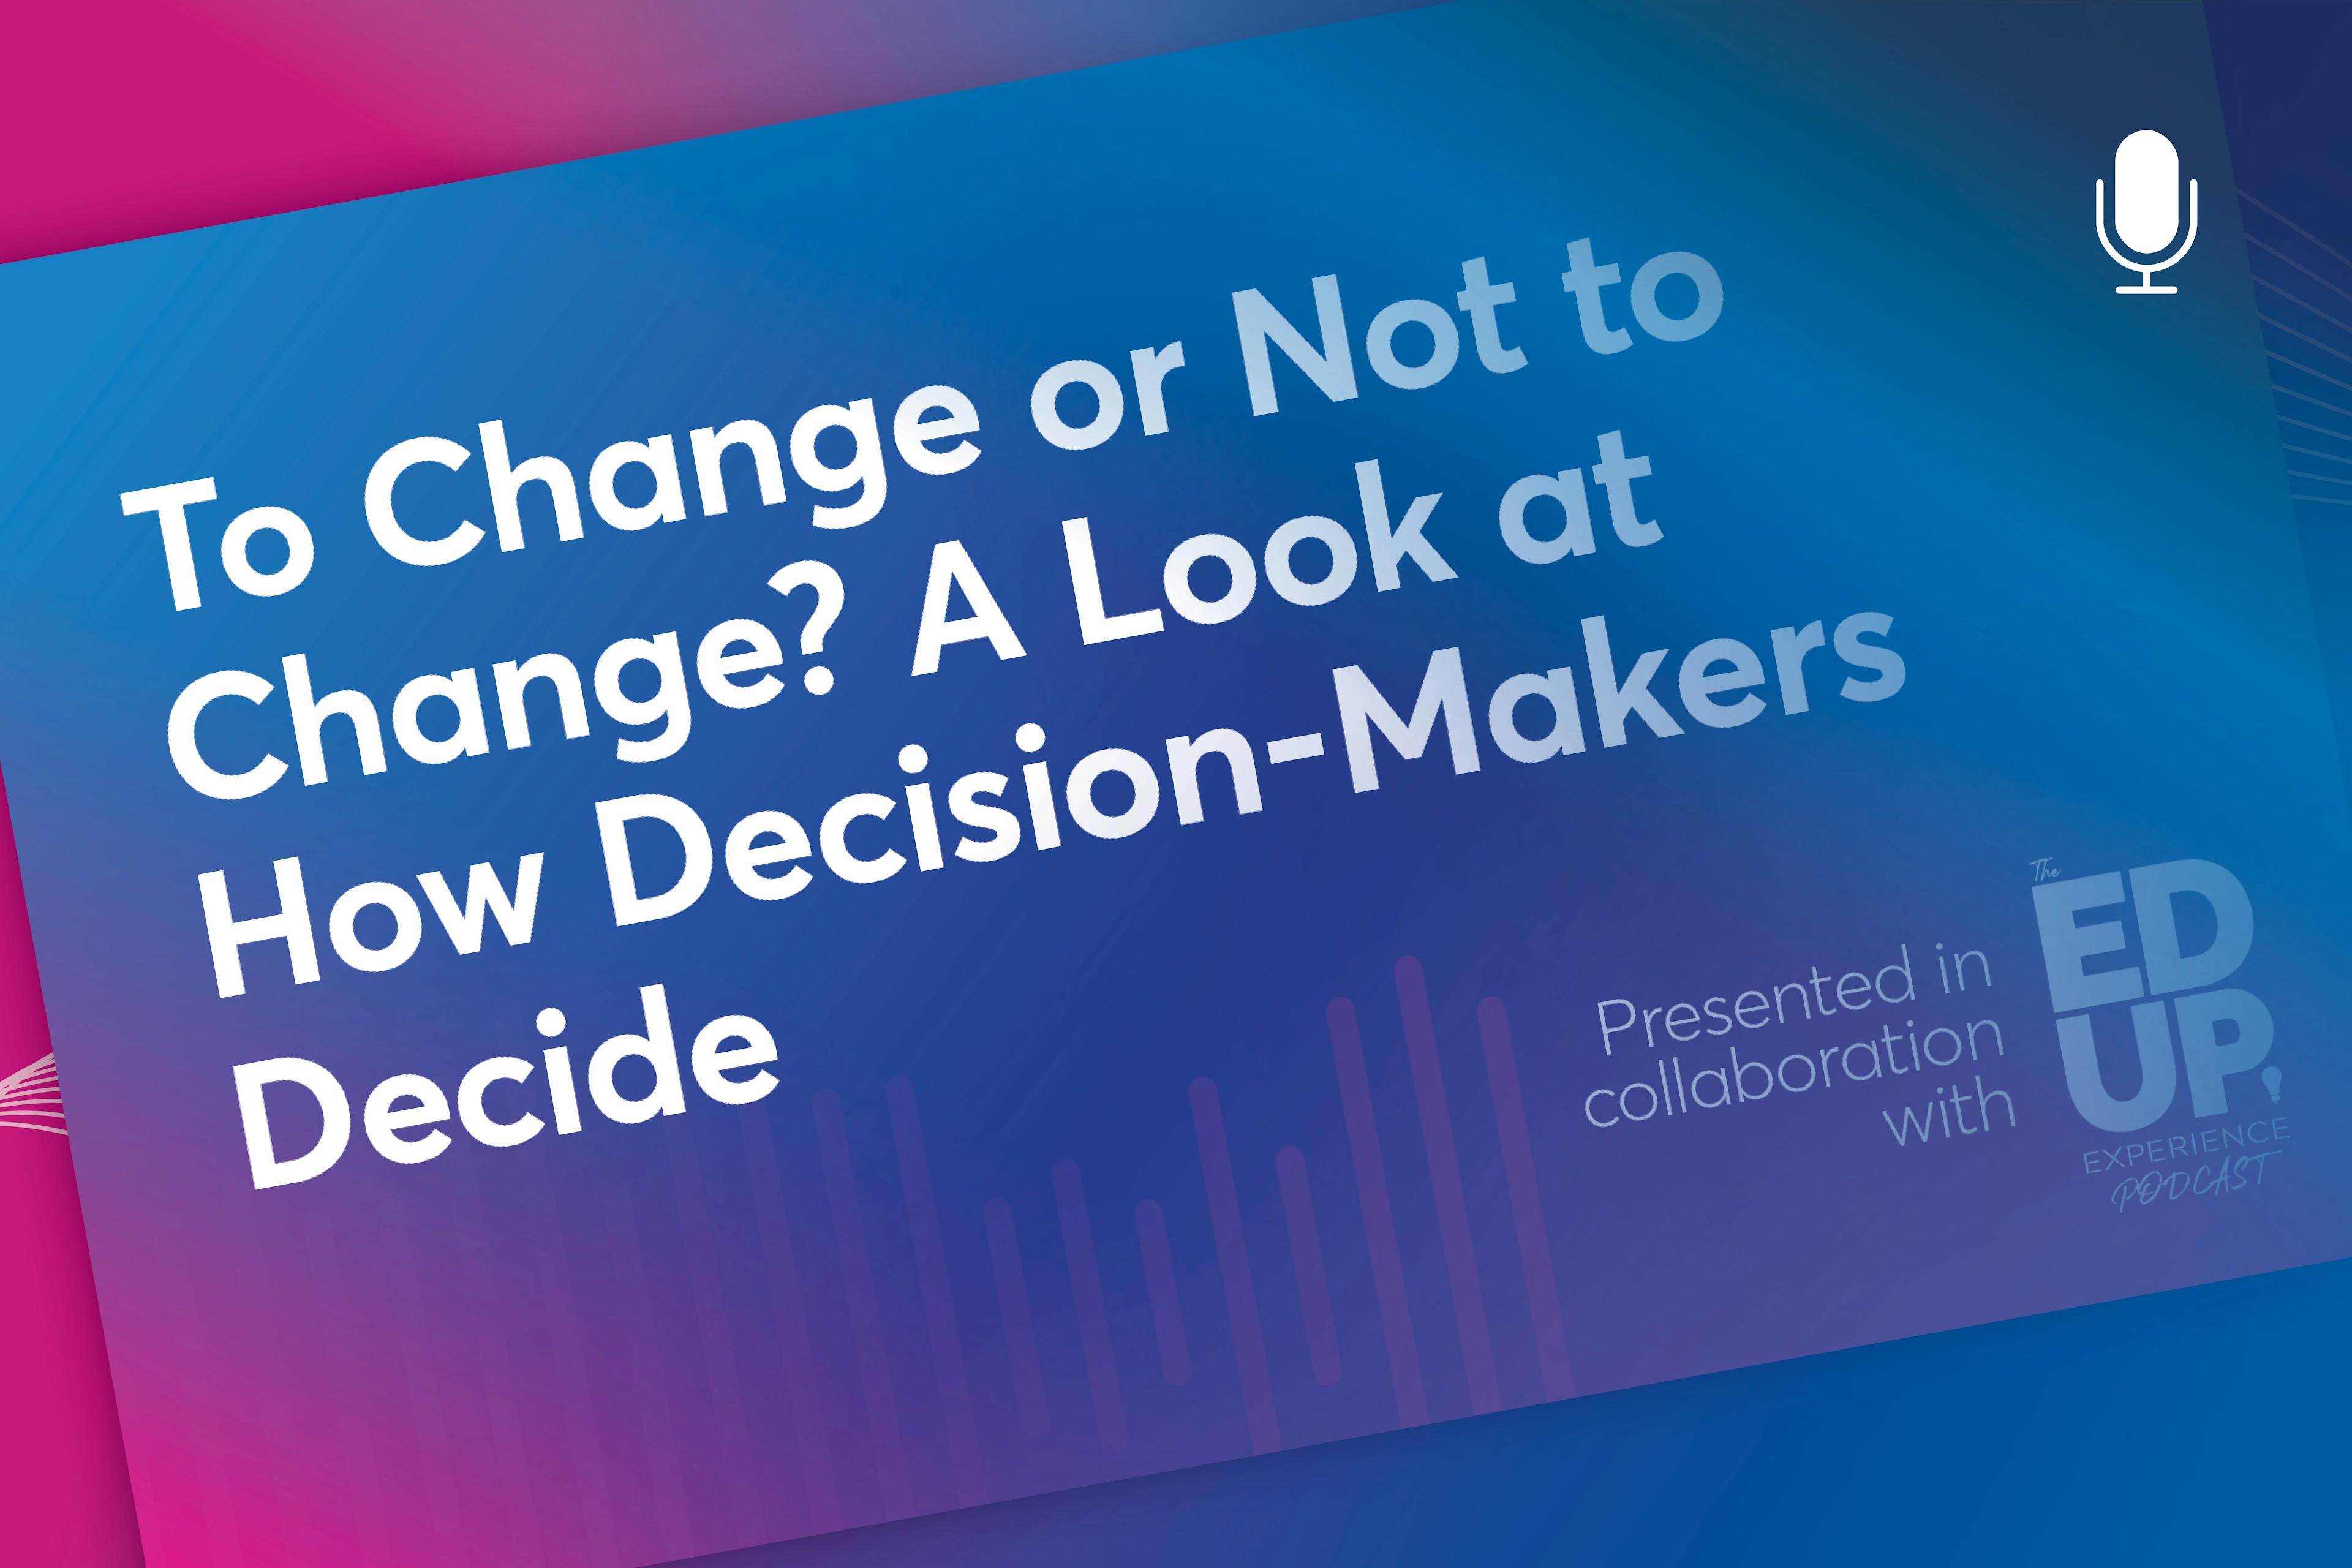 To Change or Not to Change? A Look at How Decision-Makers Decide